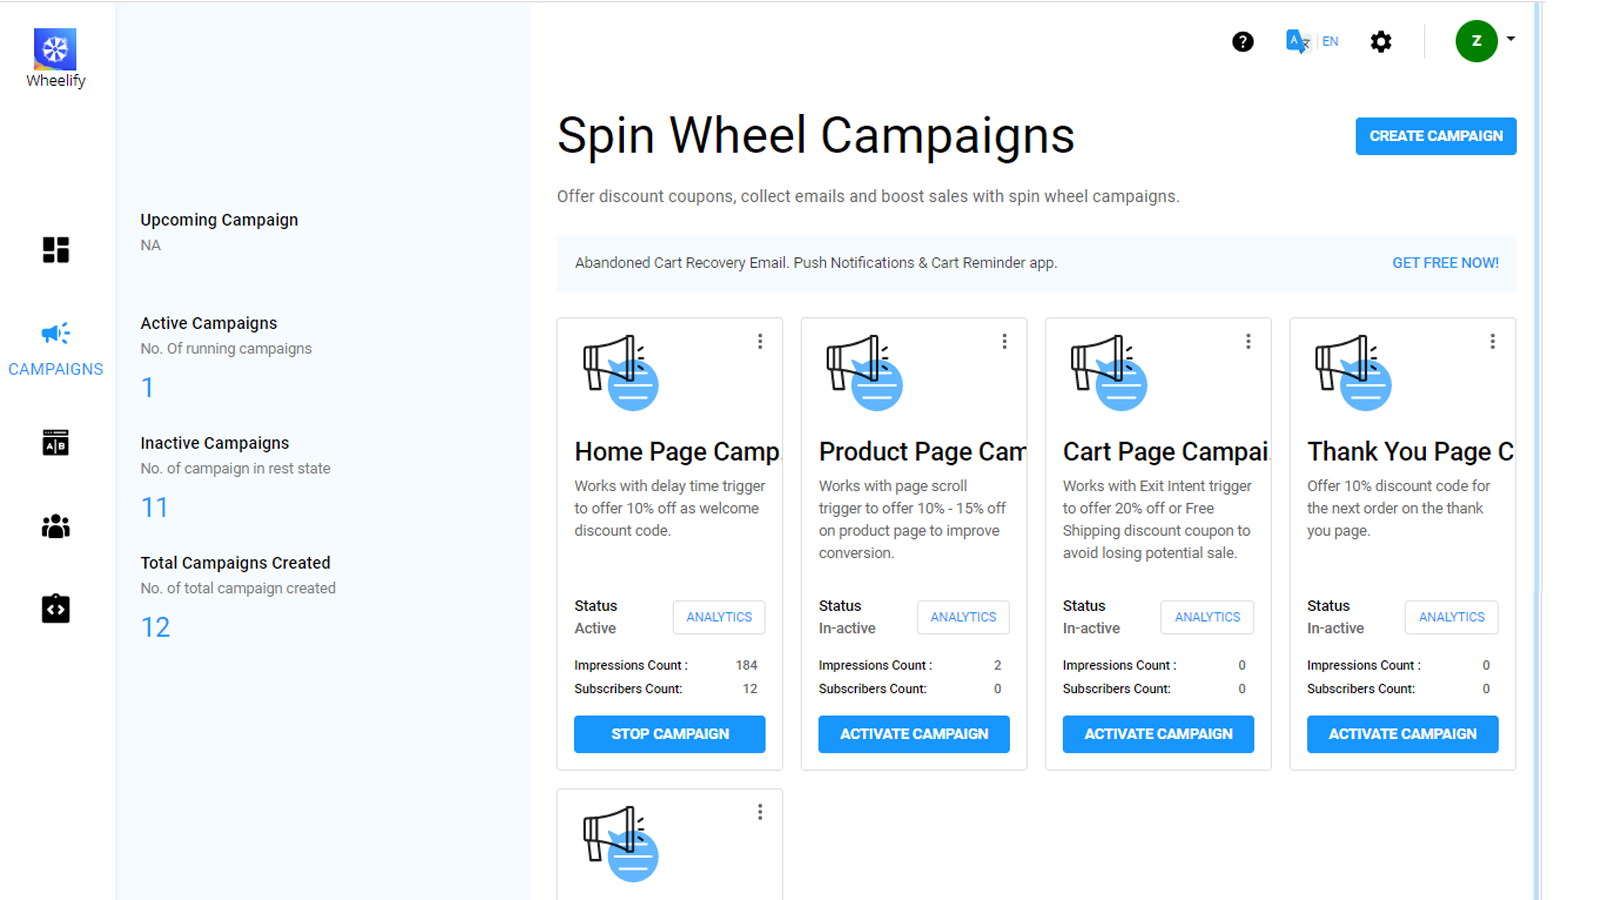 Spin wheel campaigns